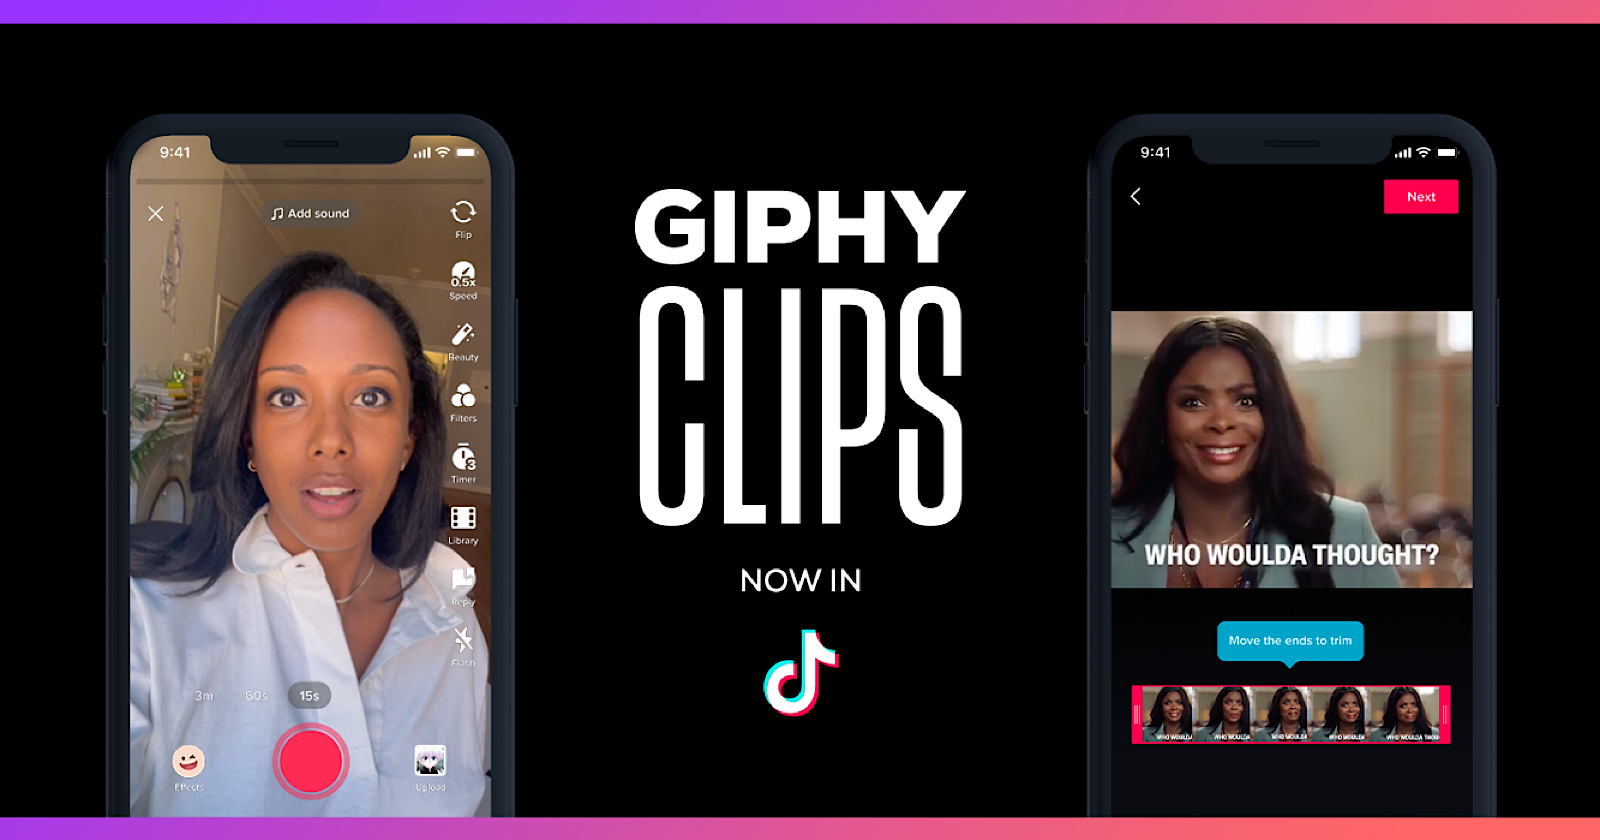 TikTok Taps Into GIPHY’s Video Clips With New Editing Tool via @sejournal, @MattGSouthern